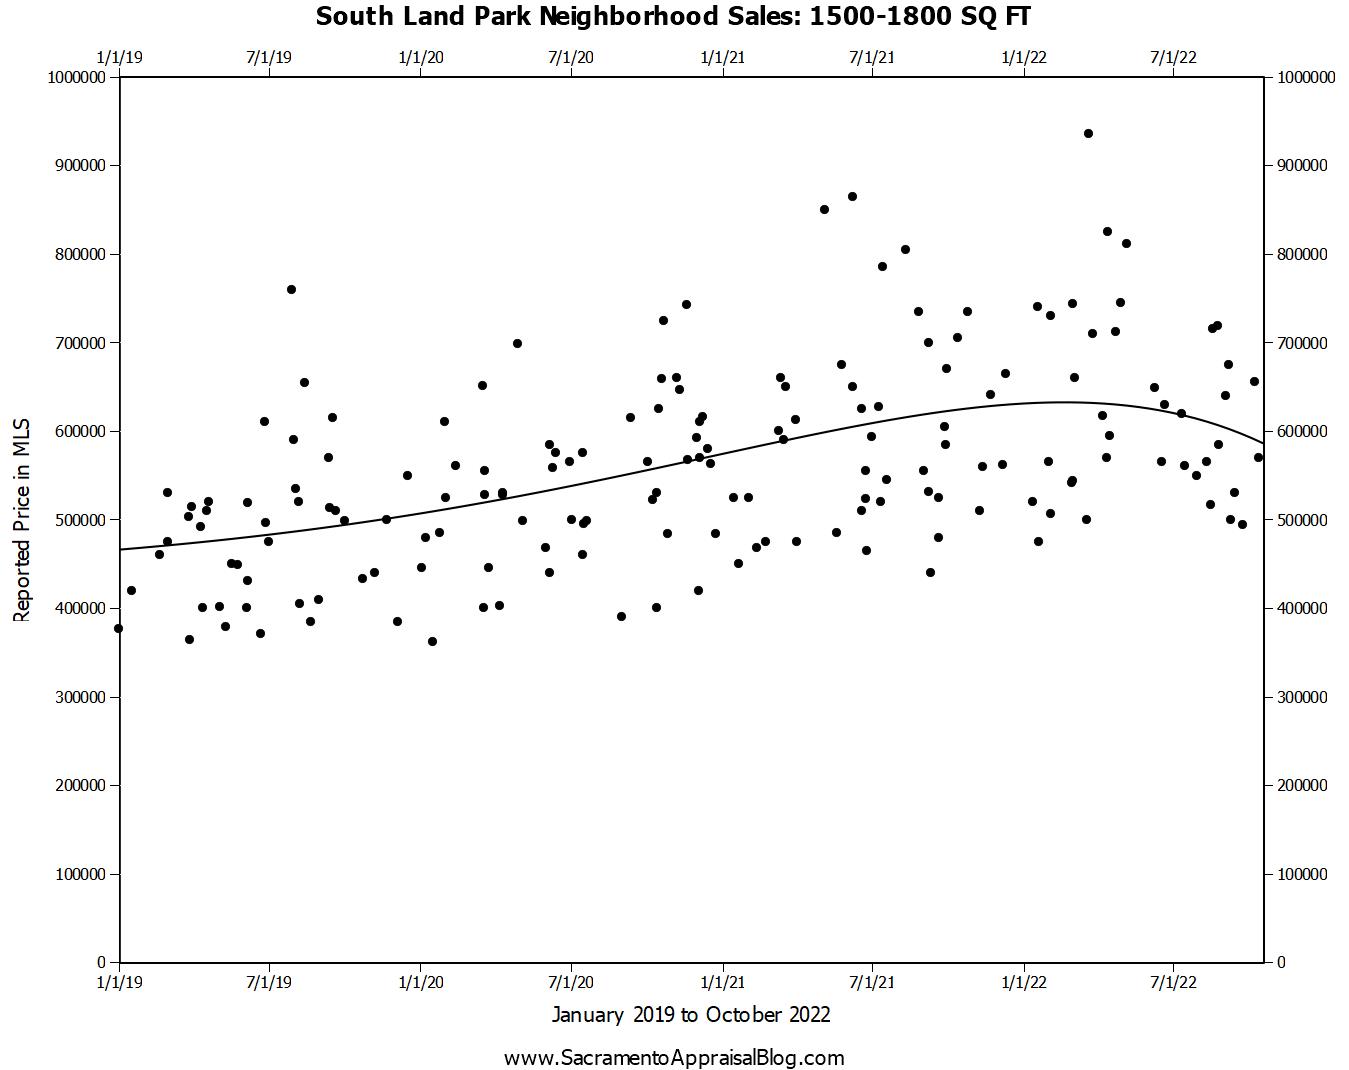 A scatter graph to show a declining trend in South Land Park 